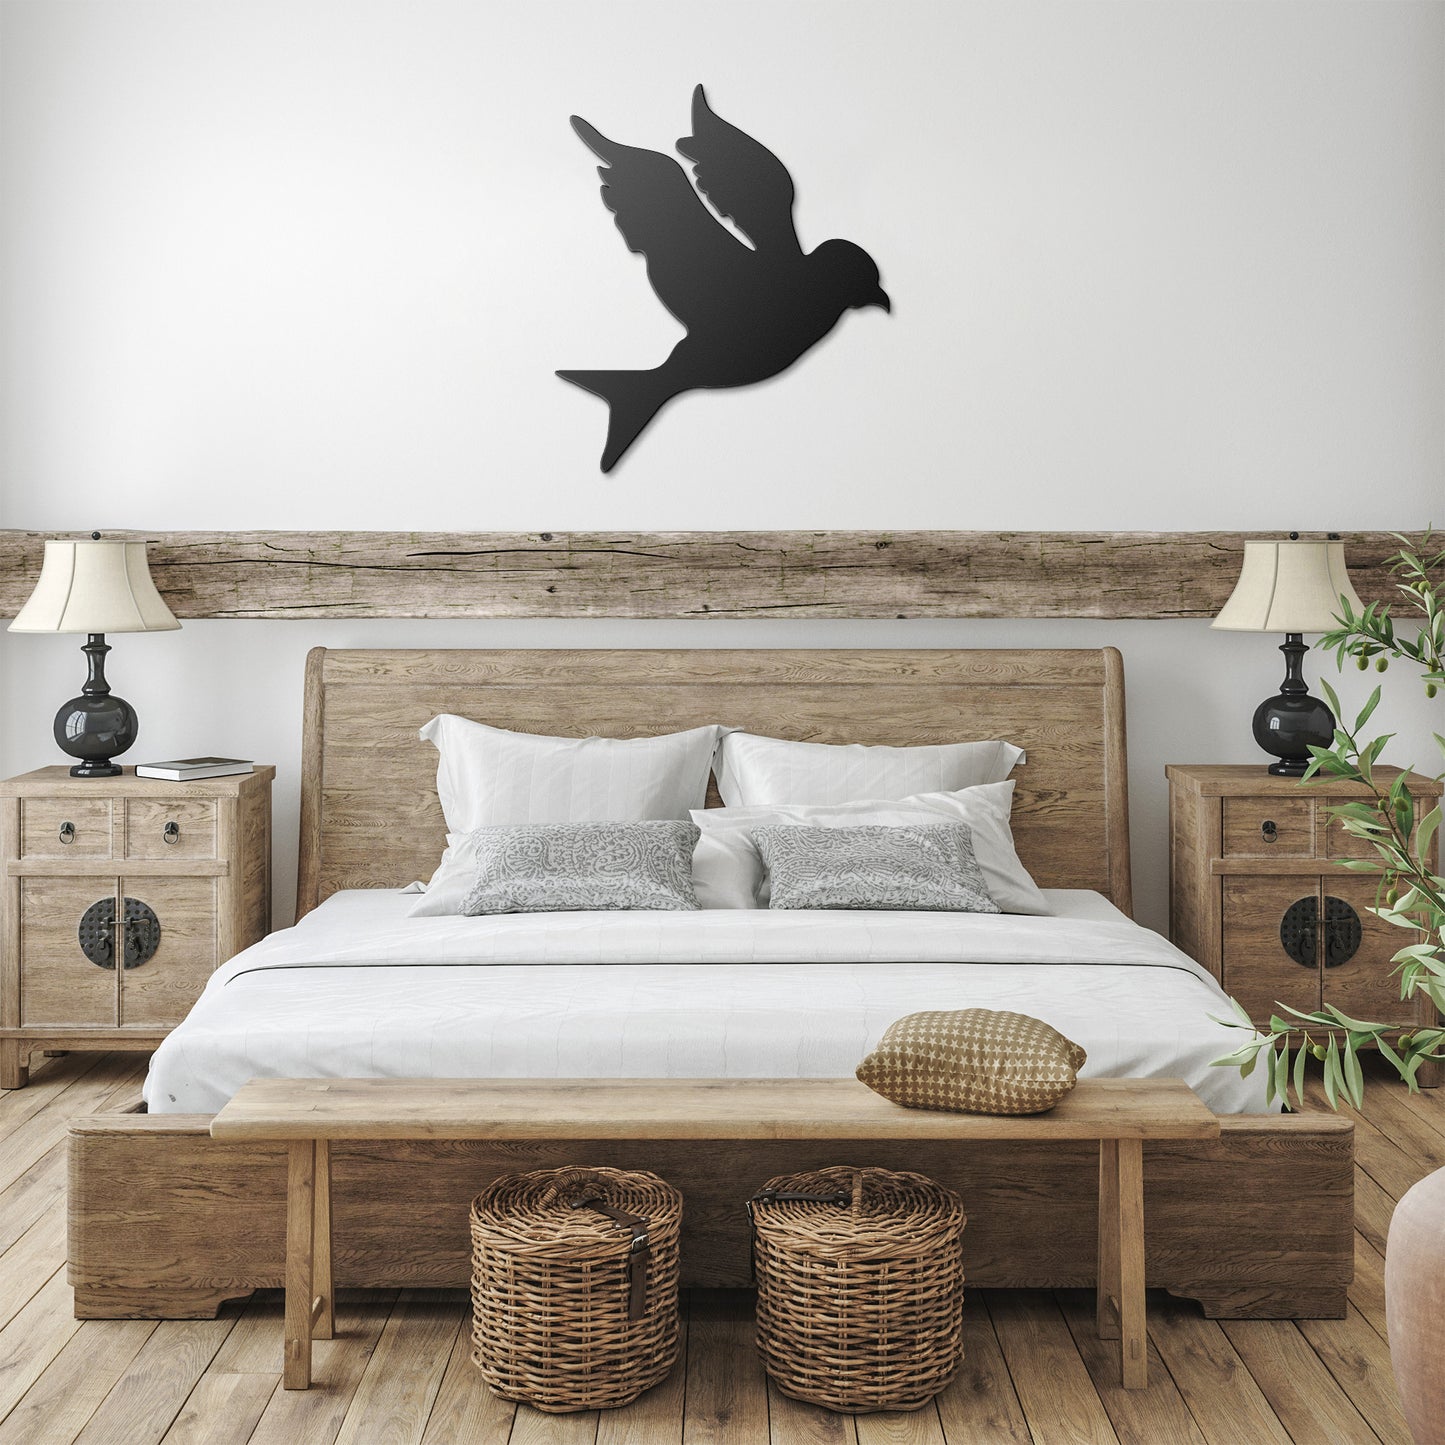 "Flying Bird" Steel Sign - Weave Got Gifts - Unique Gifts You Won’t Find Anywhere Else!